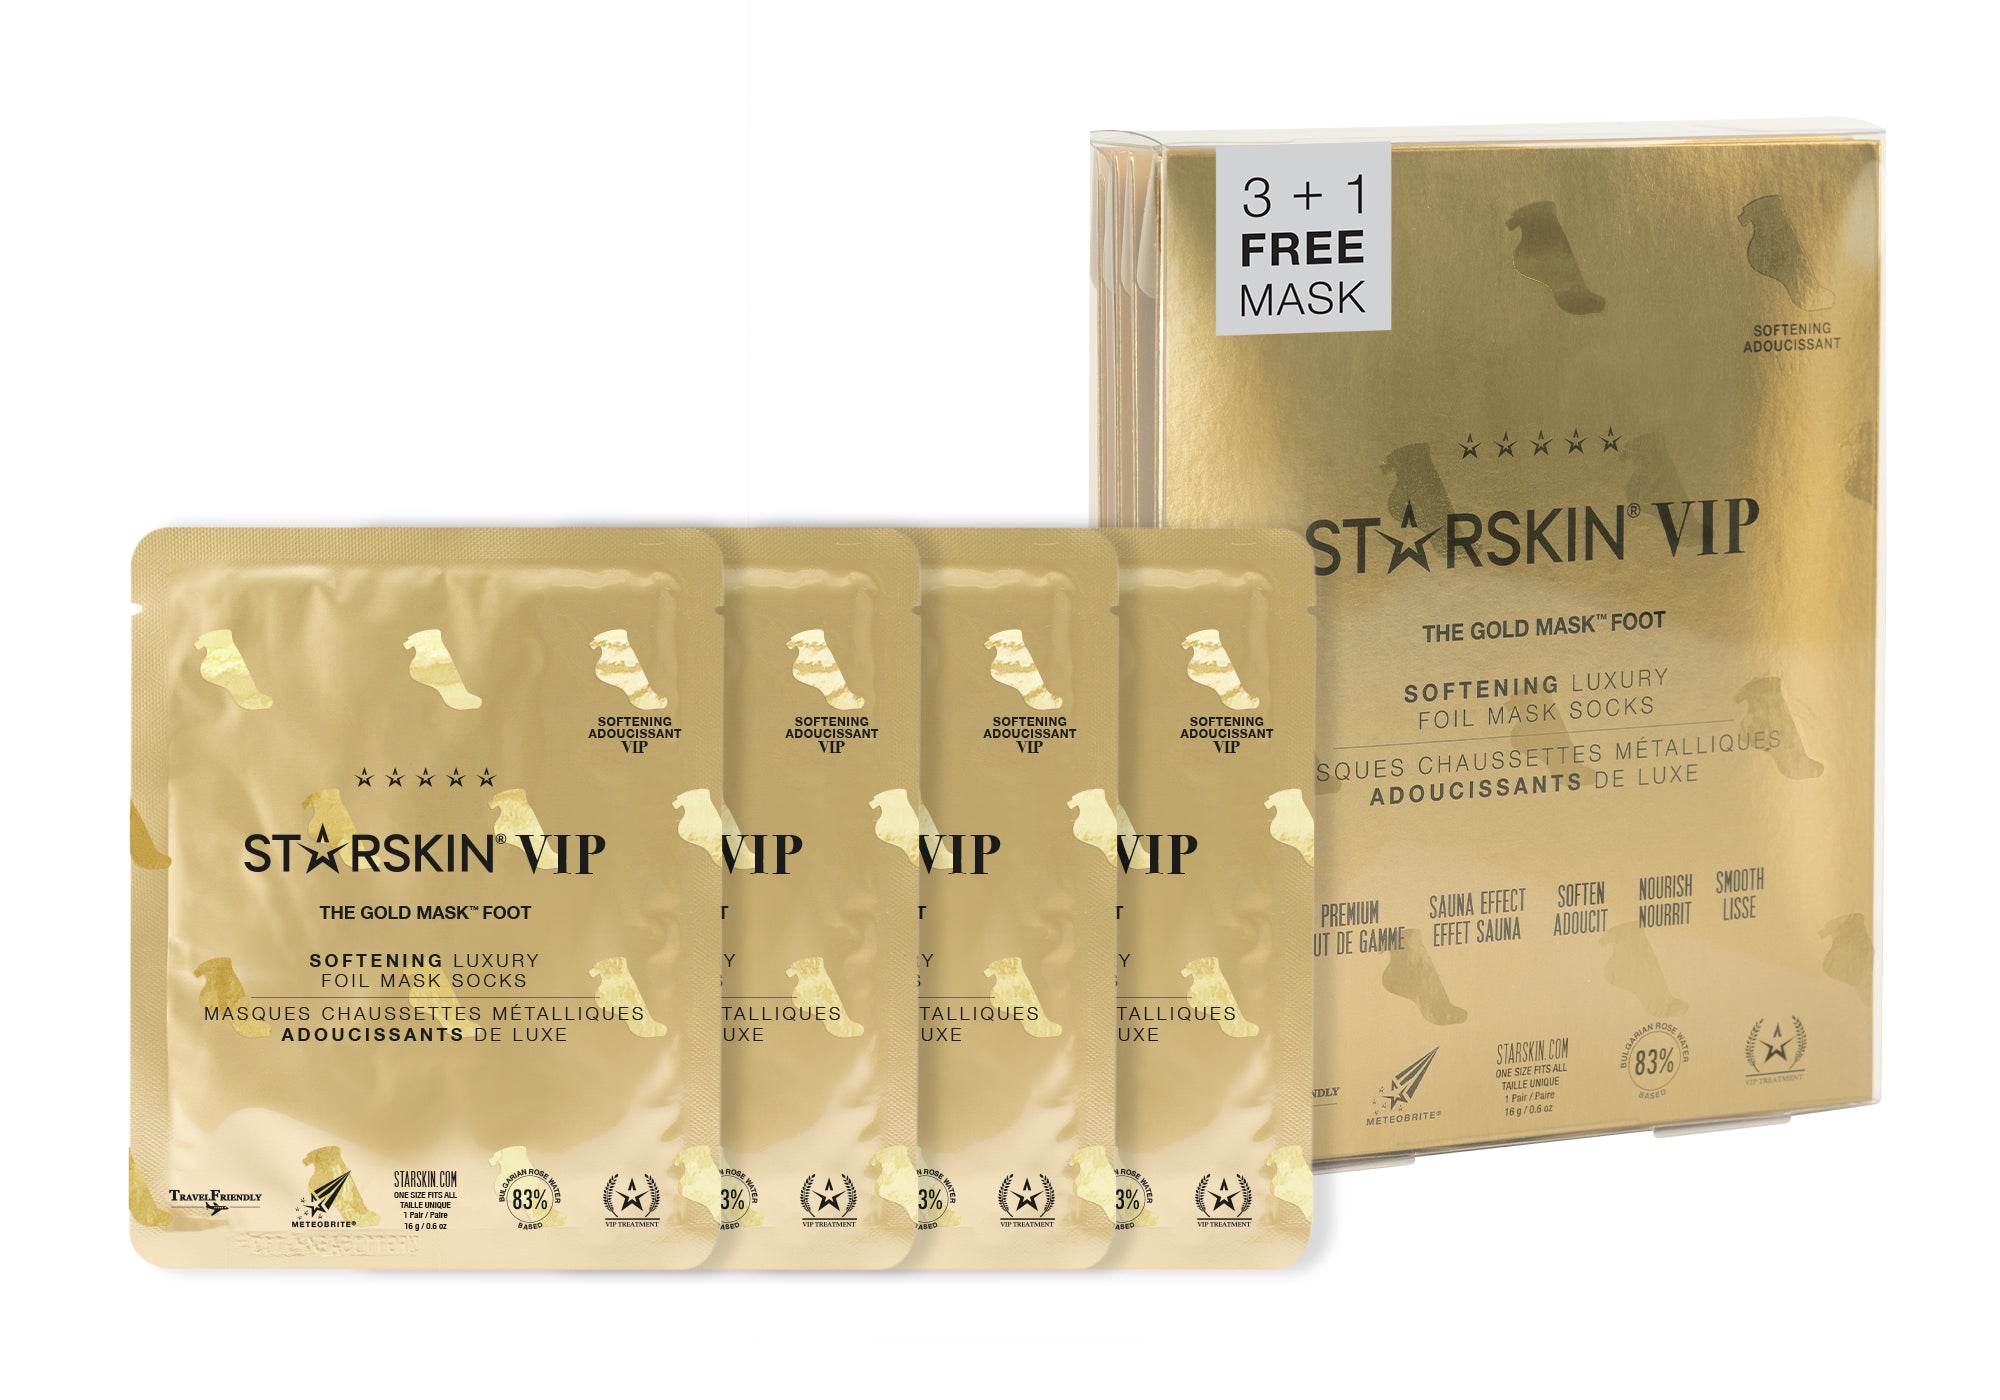 The Gold Mask Foot from Starskin front side